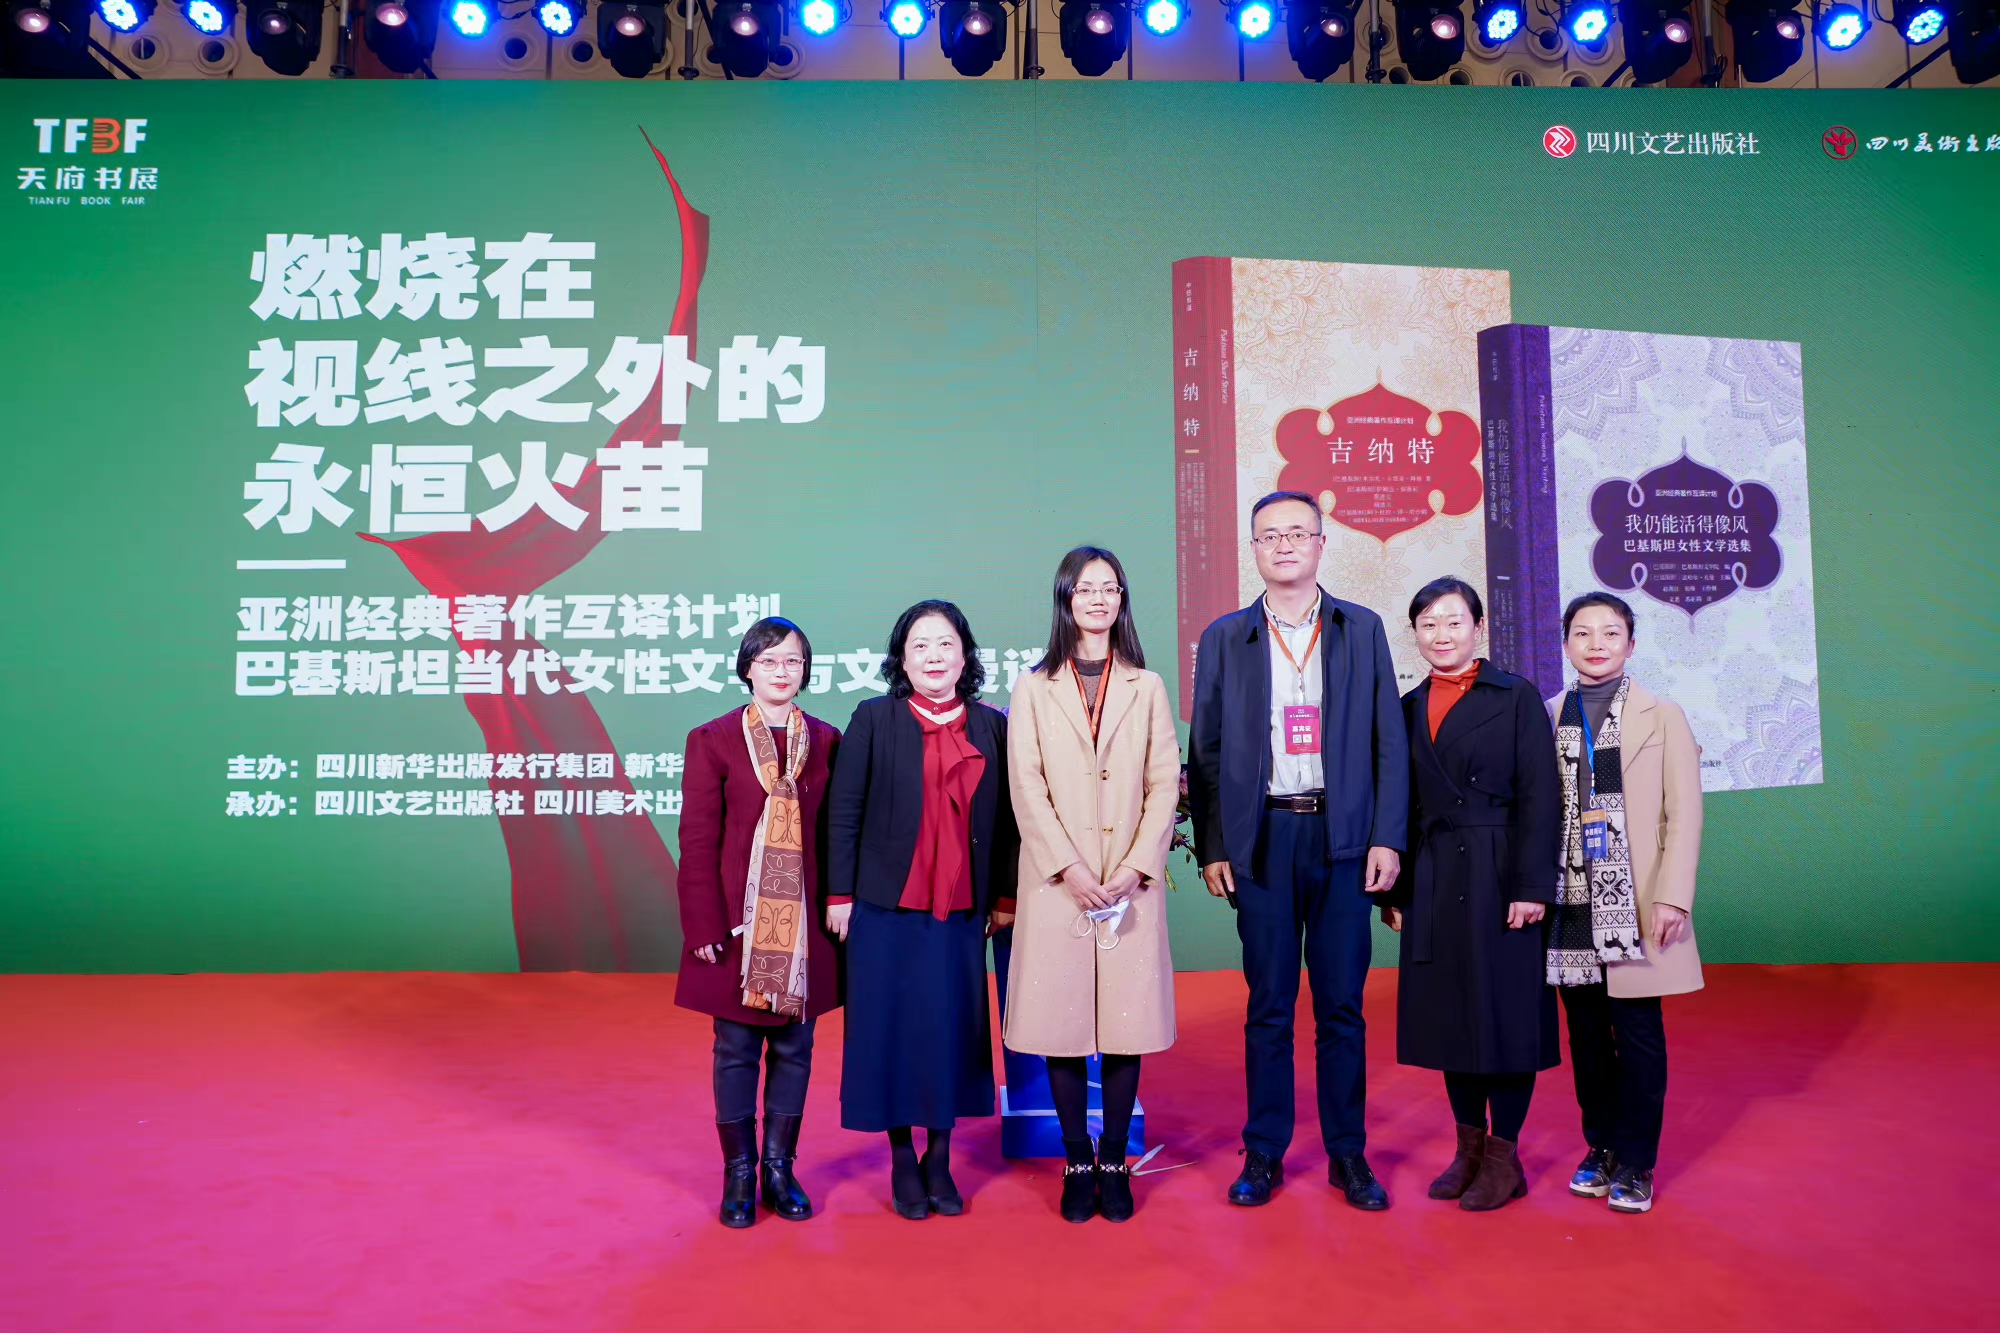 1st batch of Pakistani literatures to release in China, fostering cultural exchange